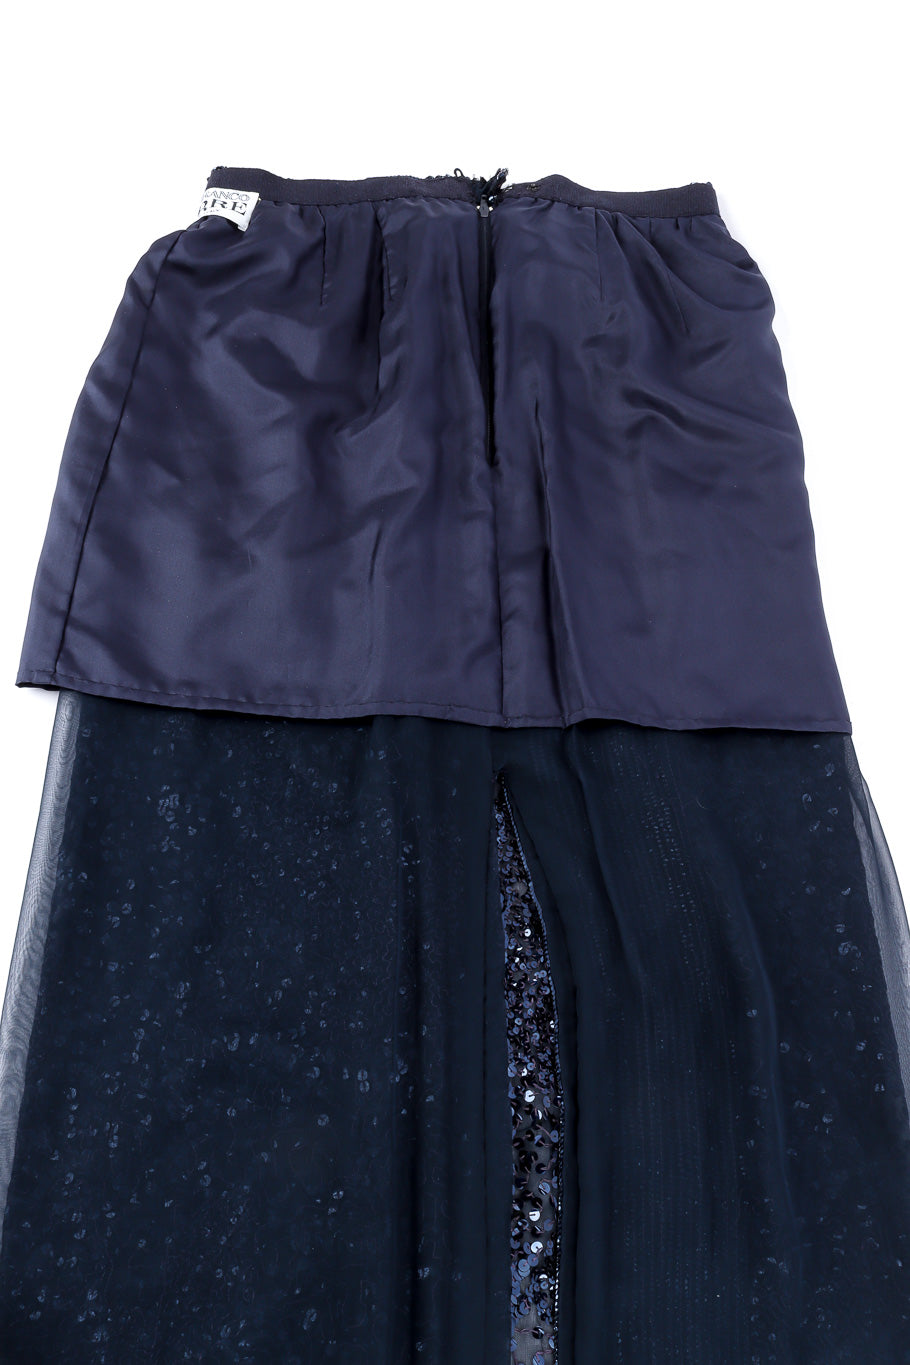 Midnight sequin skirt by Gianfranco Ferre inside out flat lay @recessla